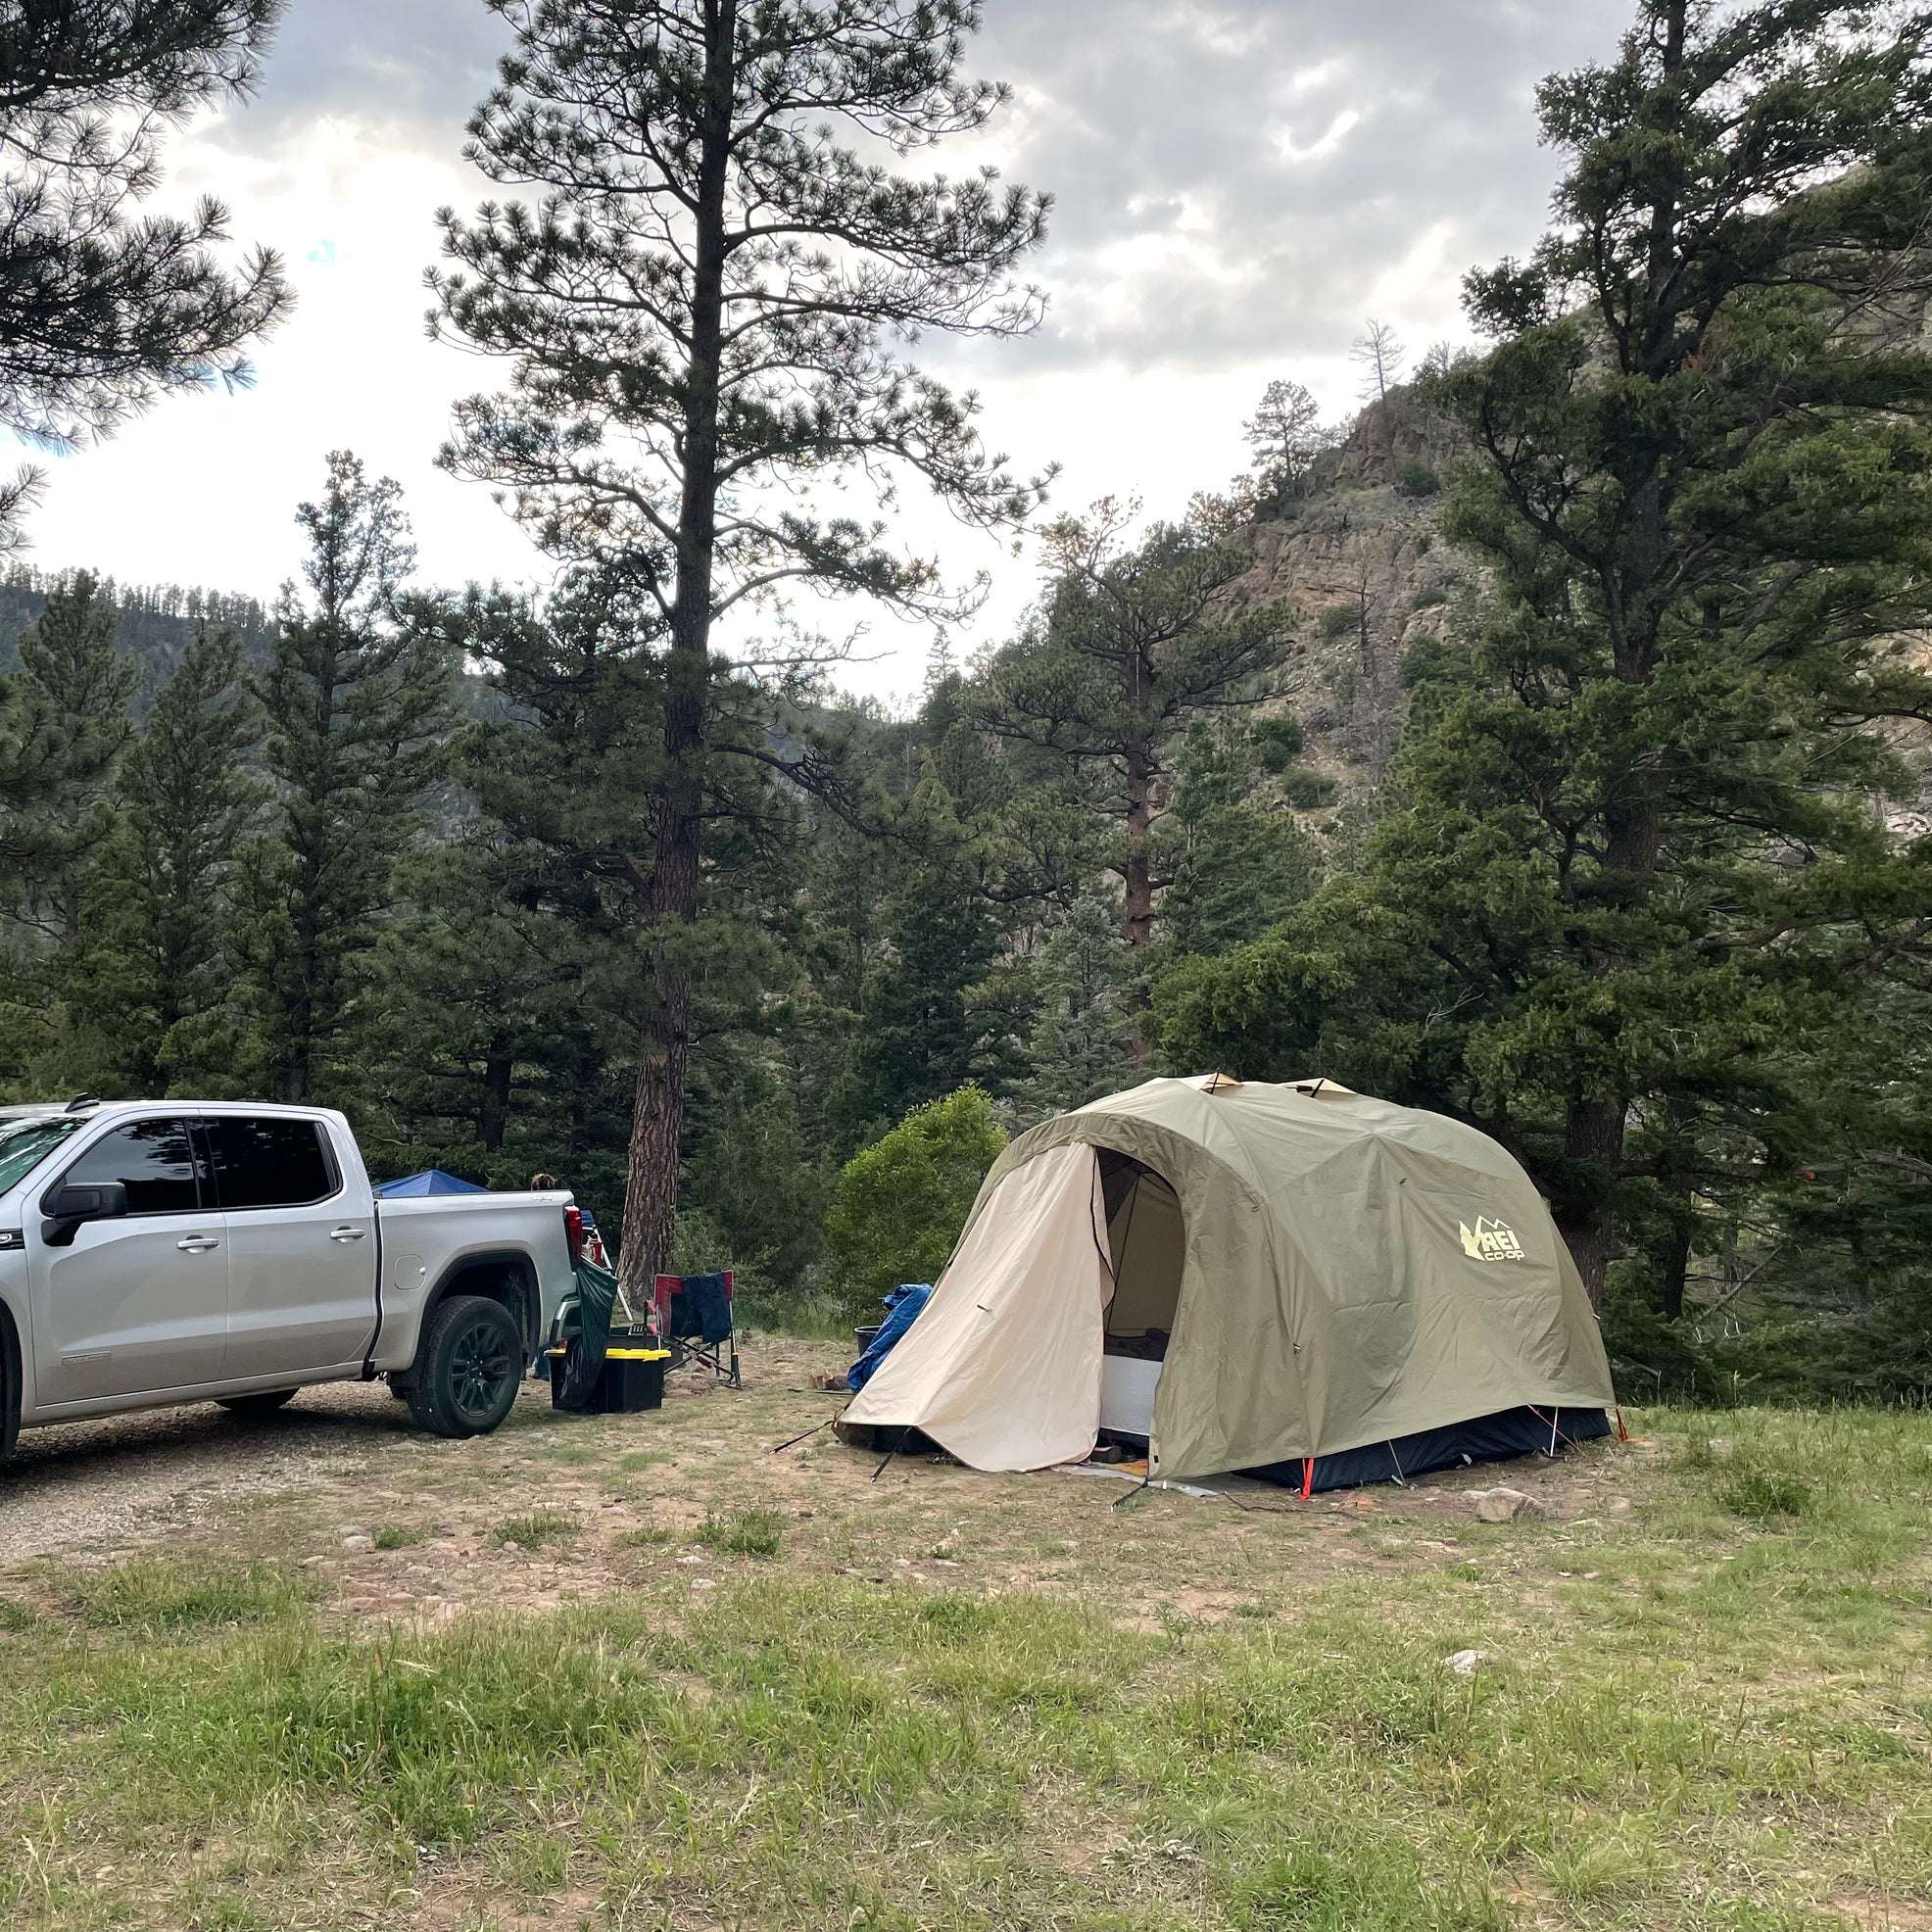 Best dispersed camping in Santa Fe National Forest